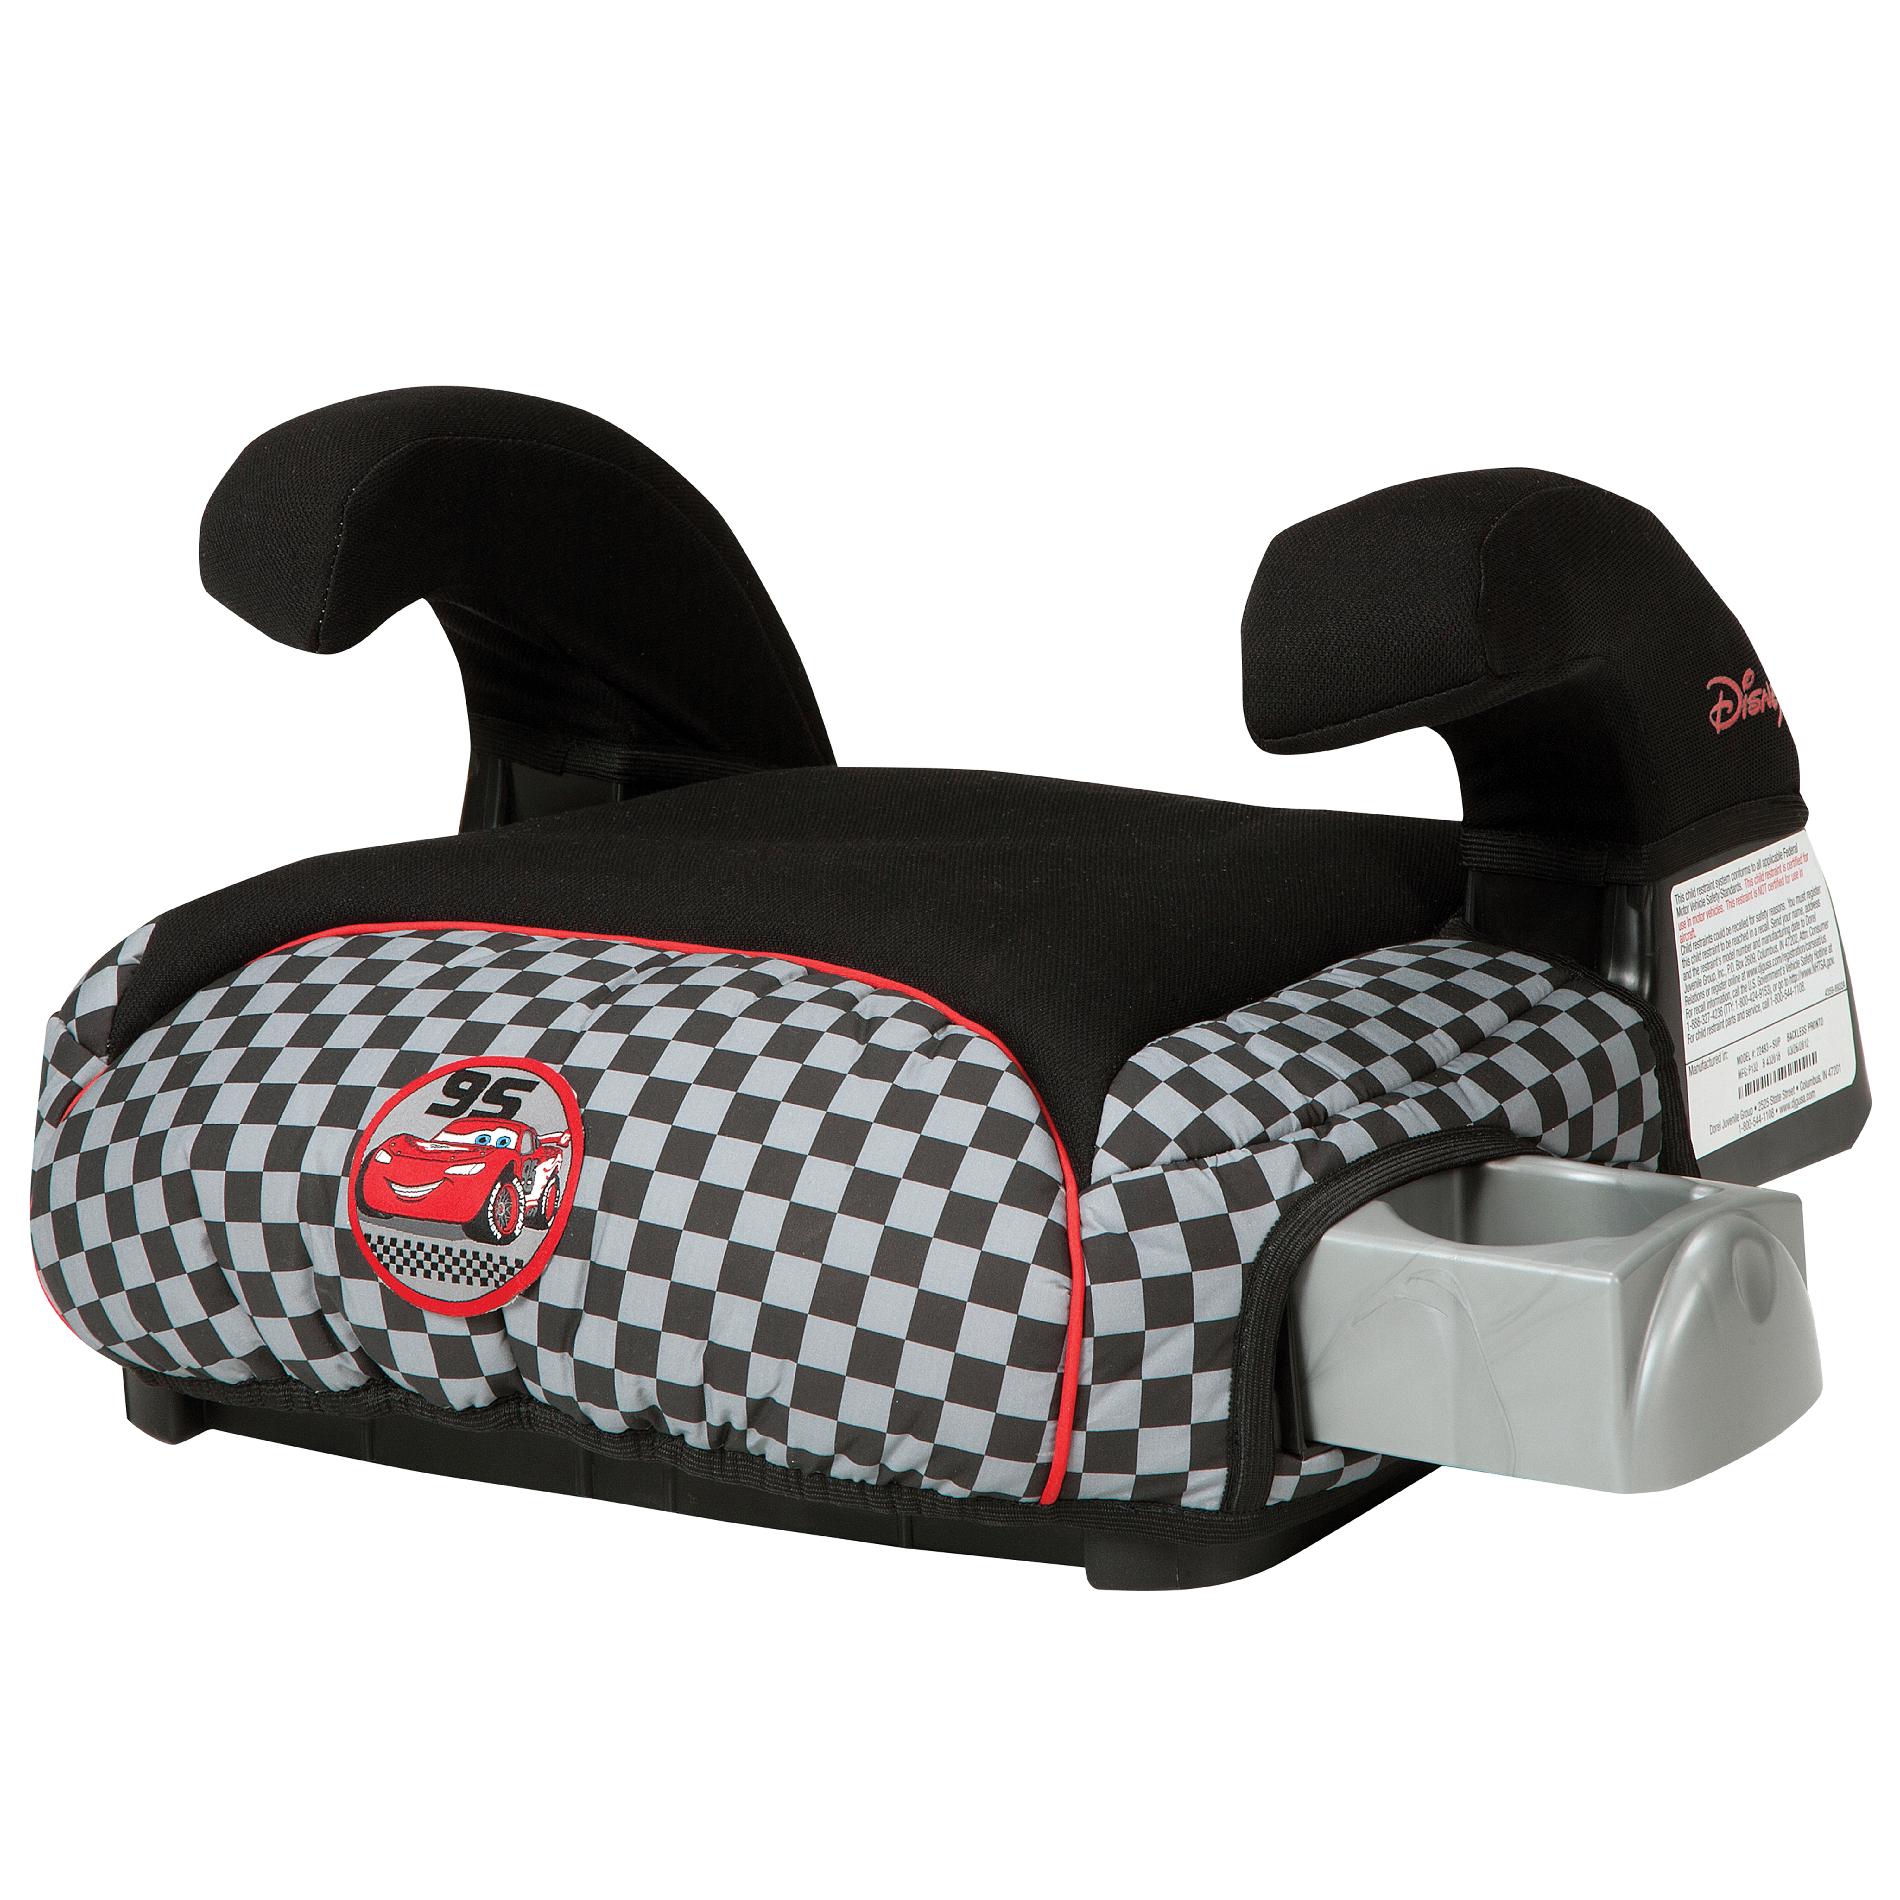 Disney Deluxe Belt-Positioning Booster Car Seat - Overdrive